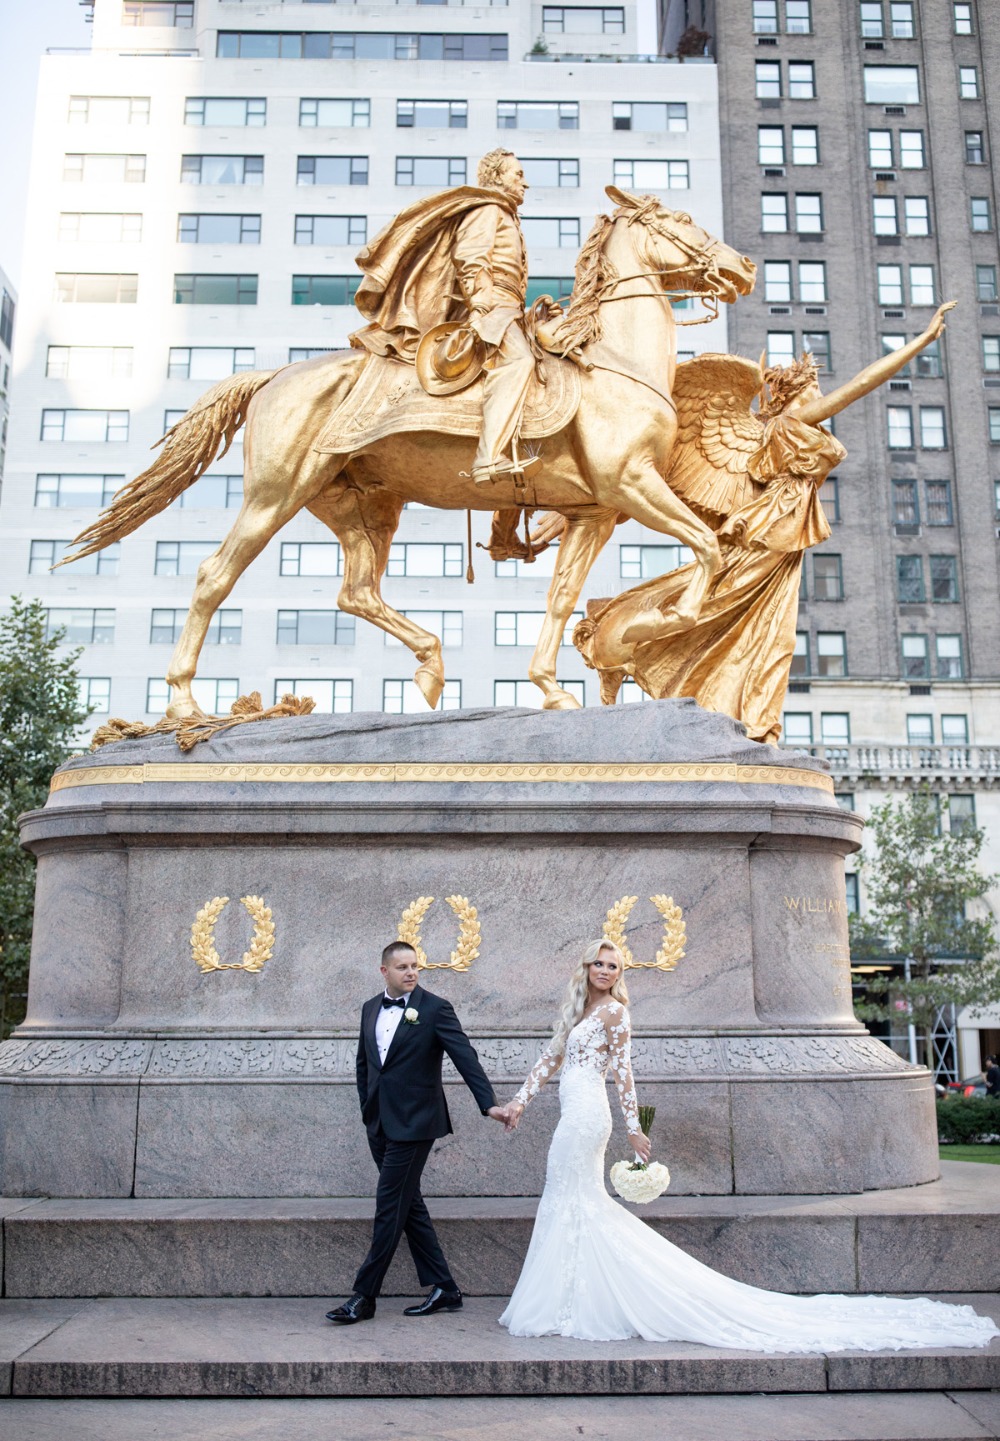 This Gold Black And White Wedding Is Stunning To The Max